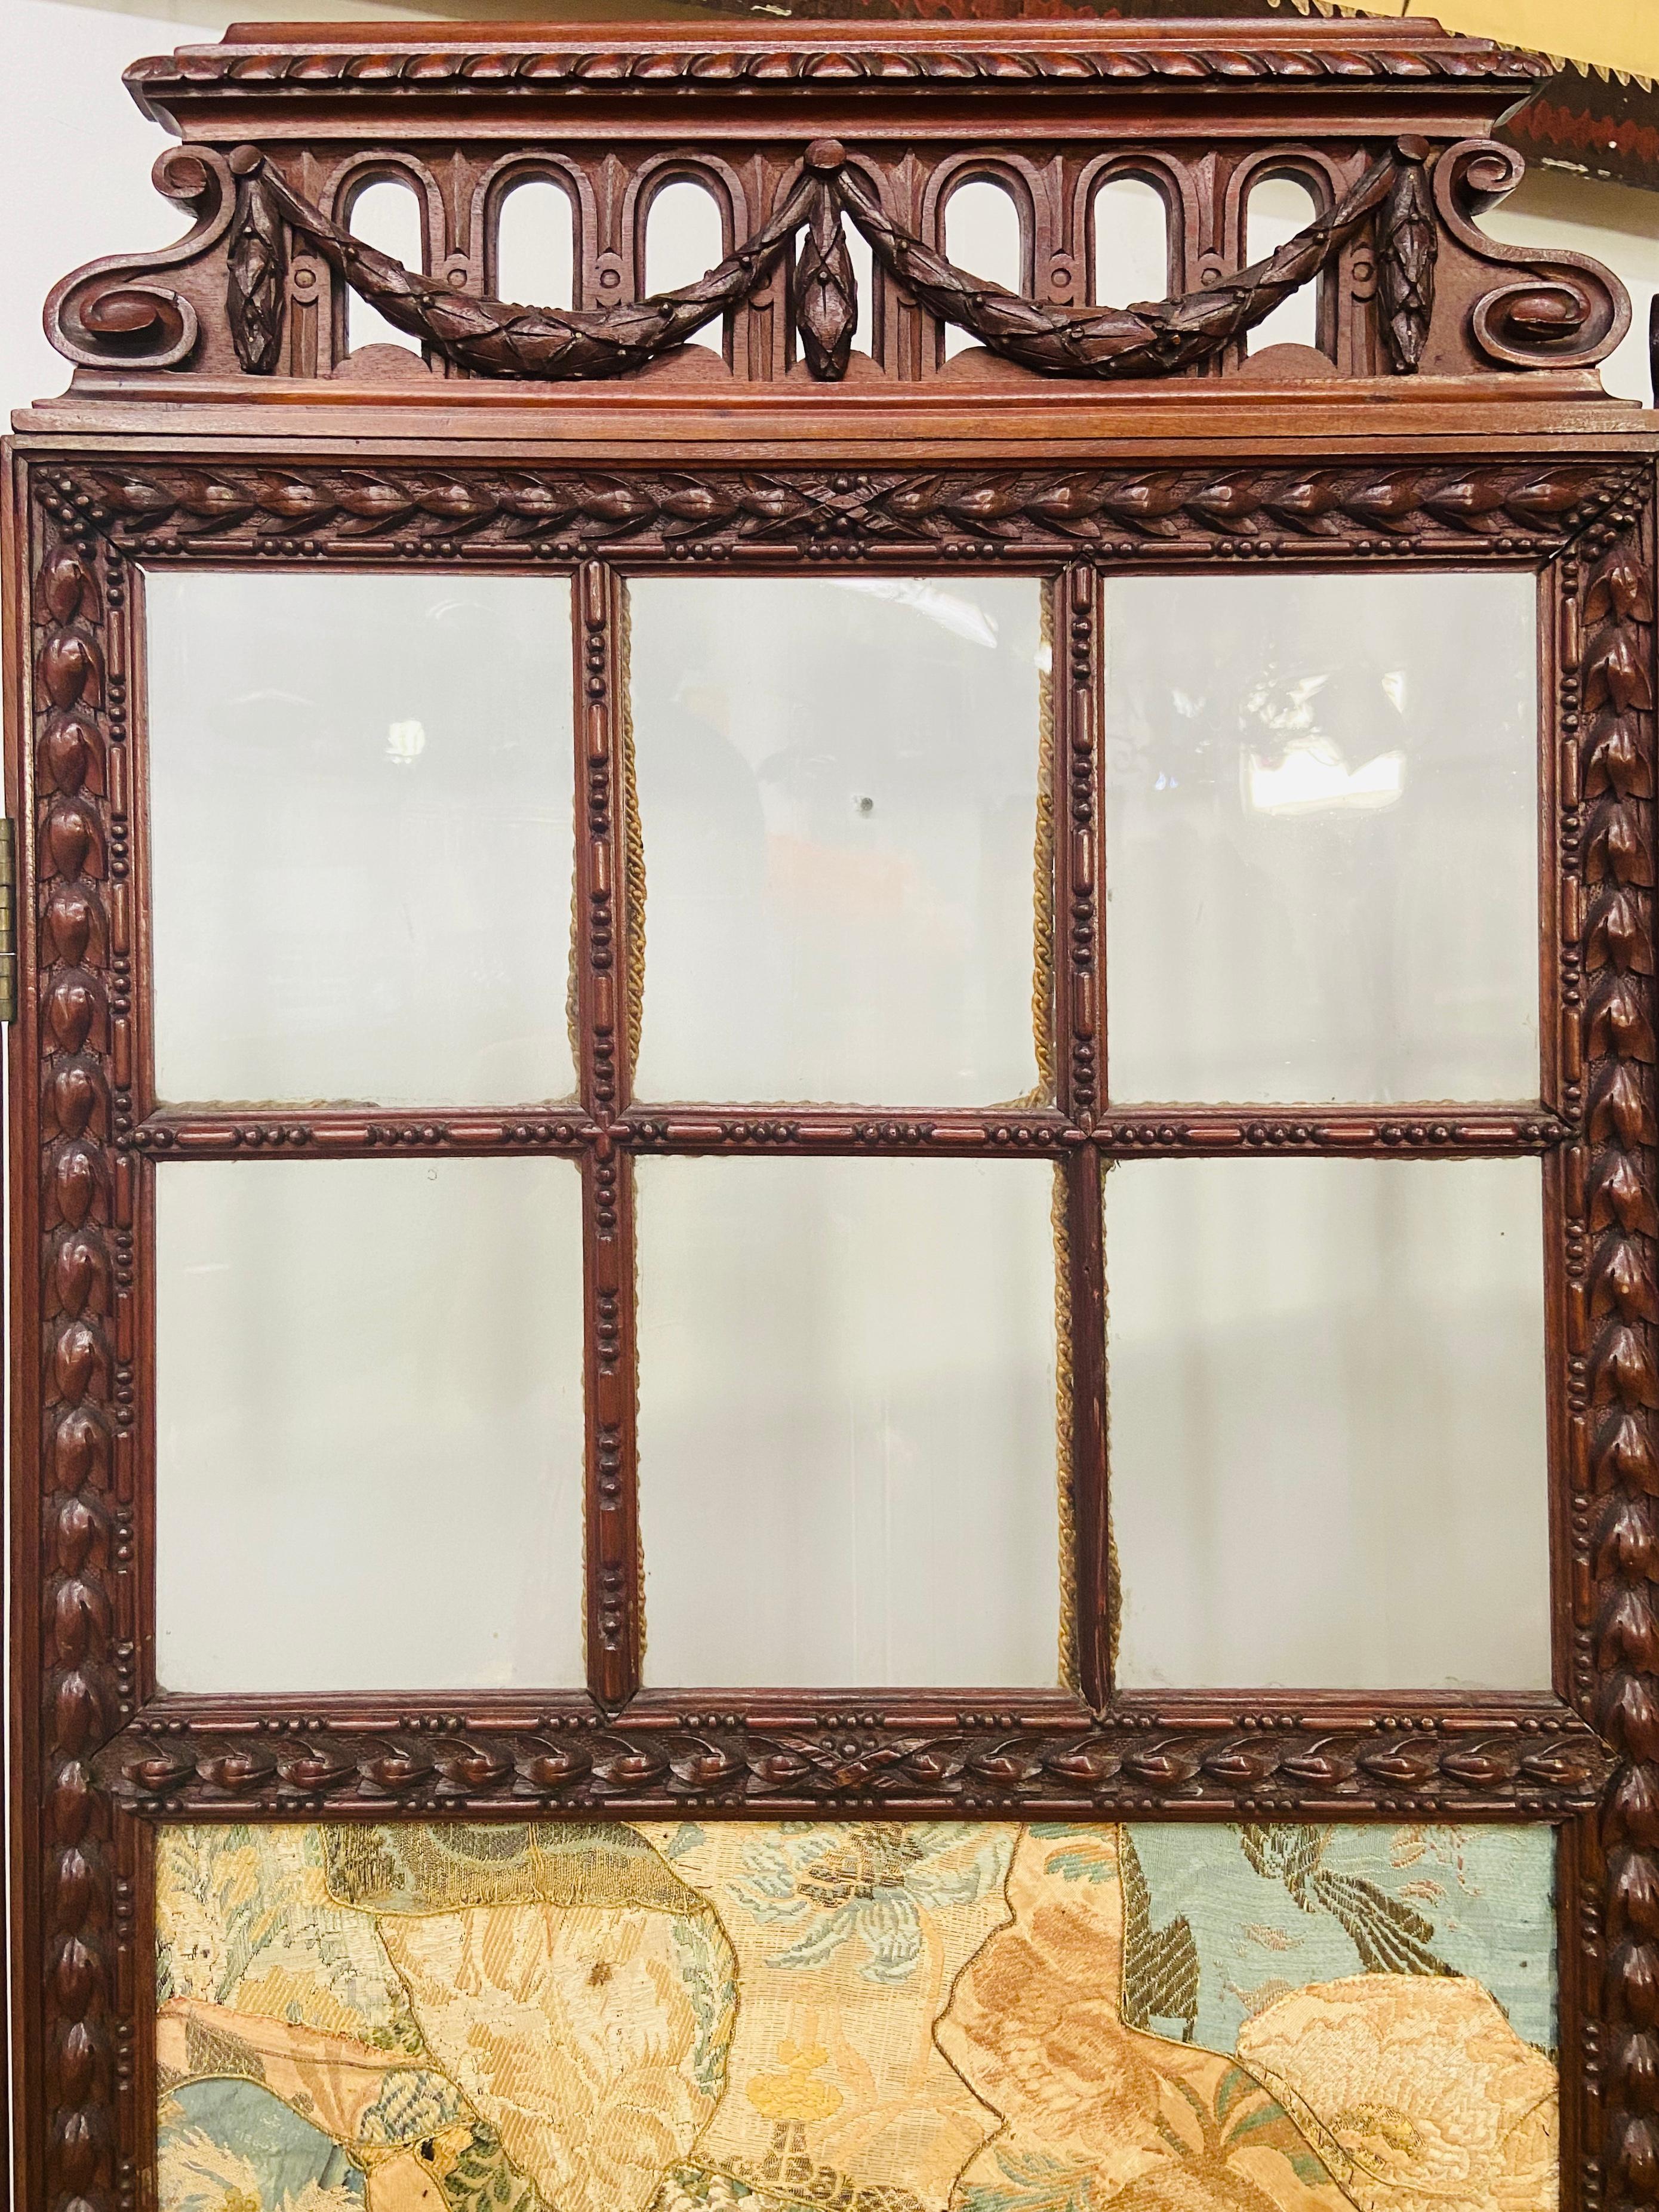 19th century English carved mahogany and glass four-panel room divider or screen

This antique four-fold upholstered divider or screen features a delicate acanthus leaf design carved mahogany and an original silk oriental motif upholstery. Each